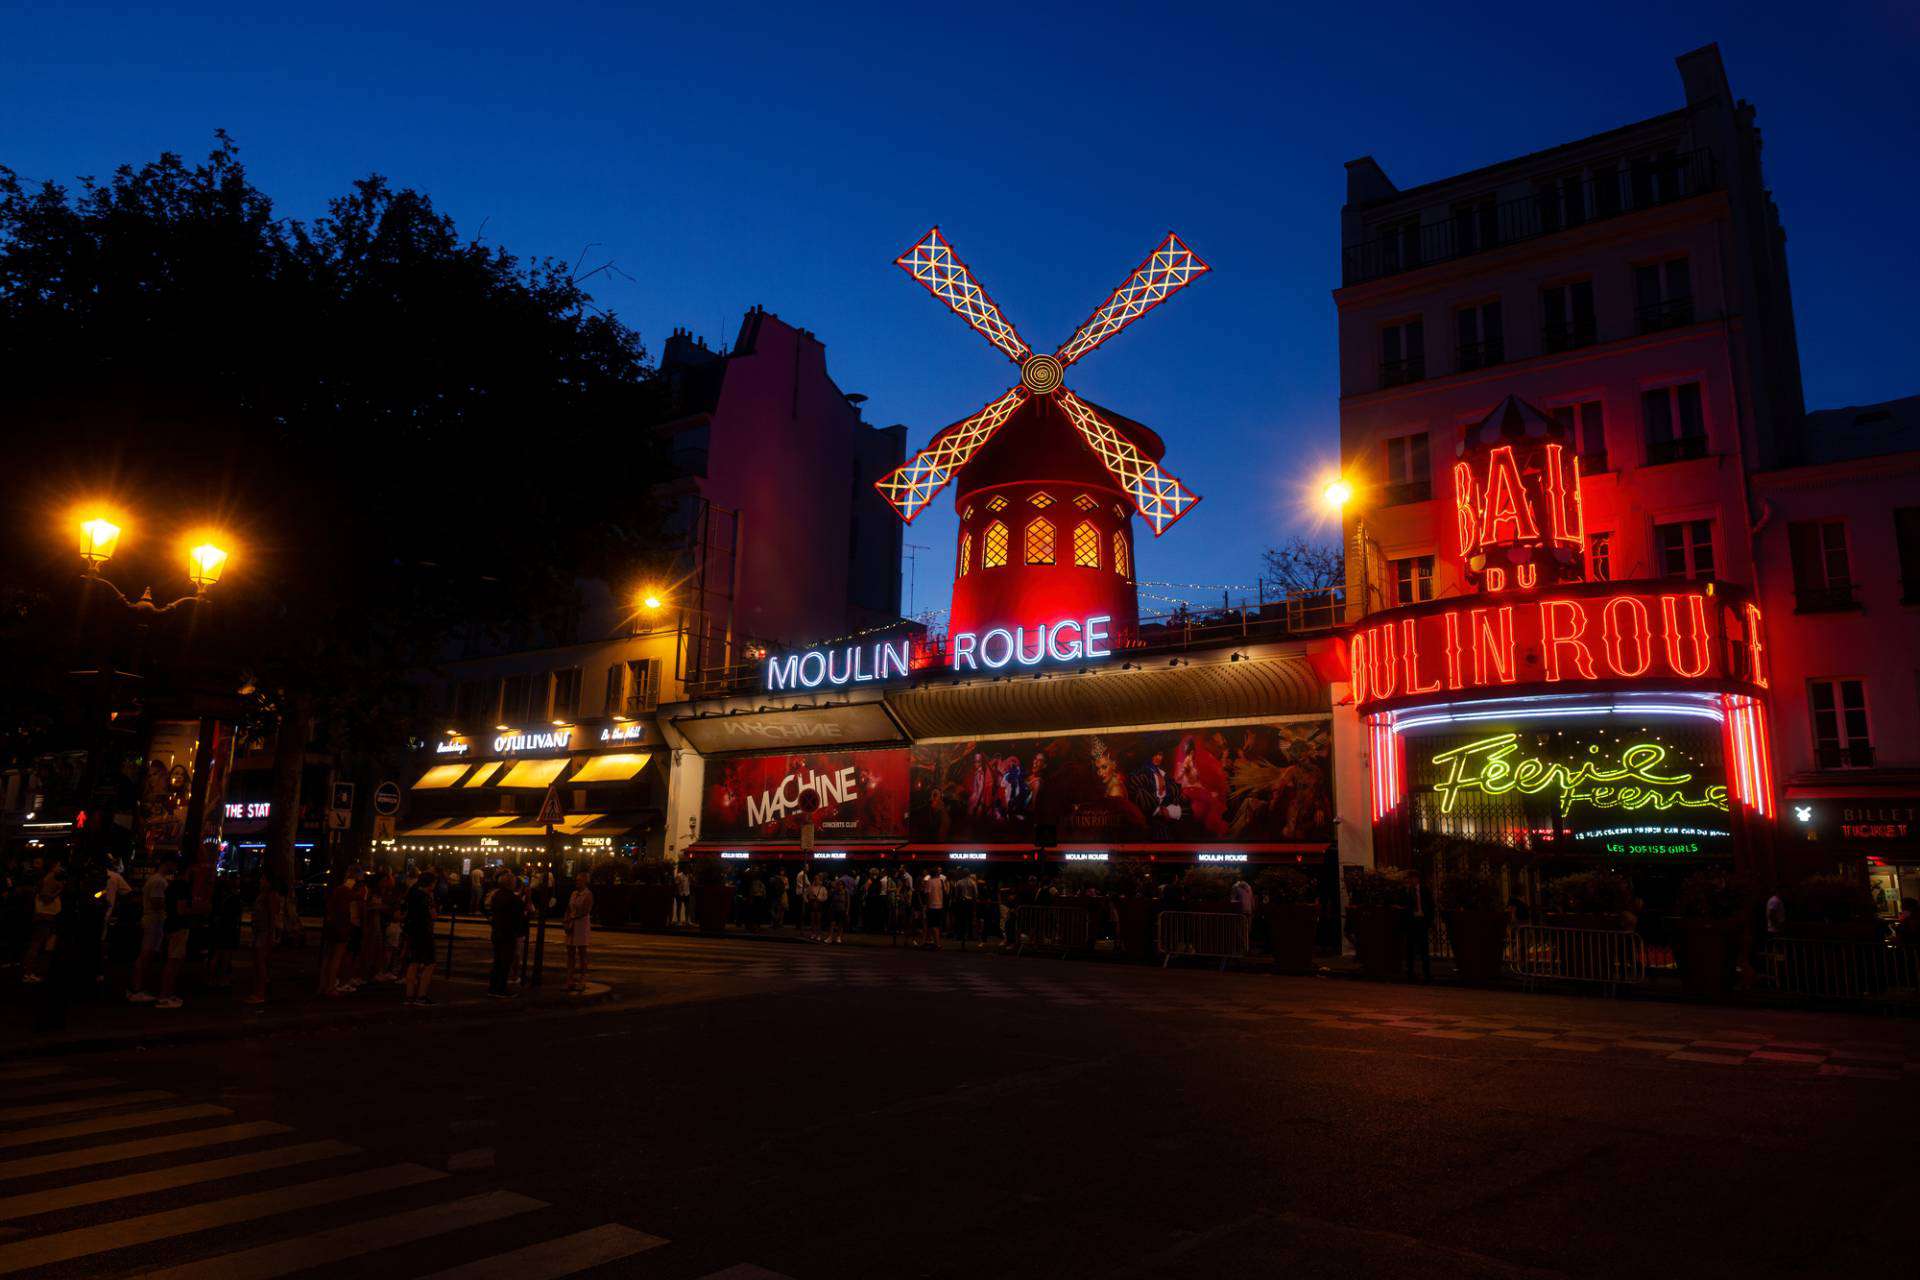 Cabaret Moulin Rouge in the night time.